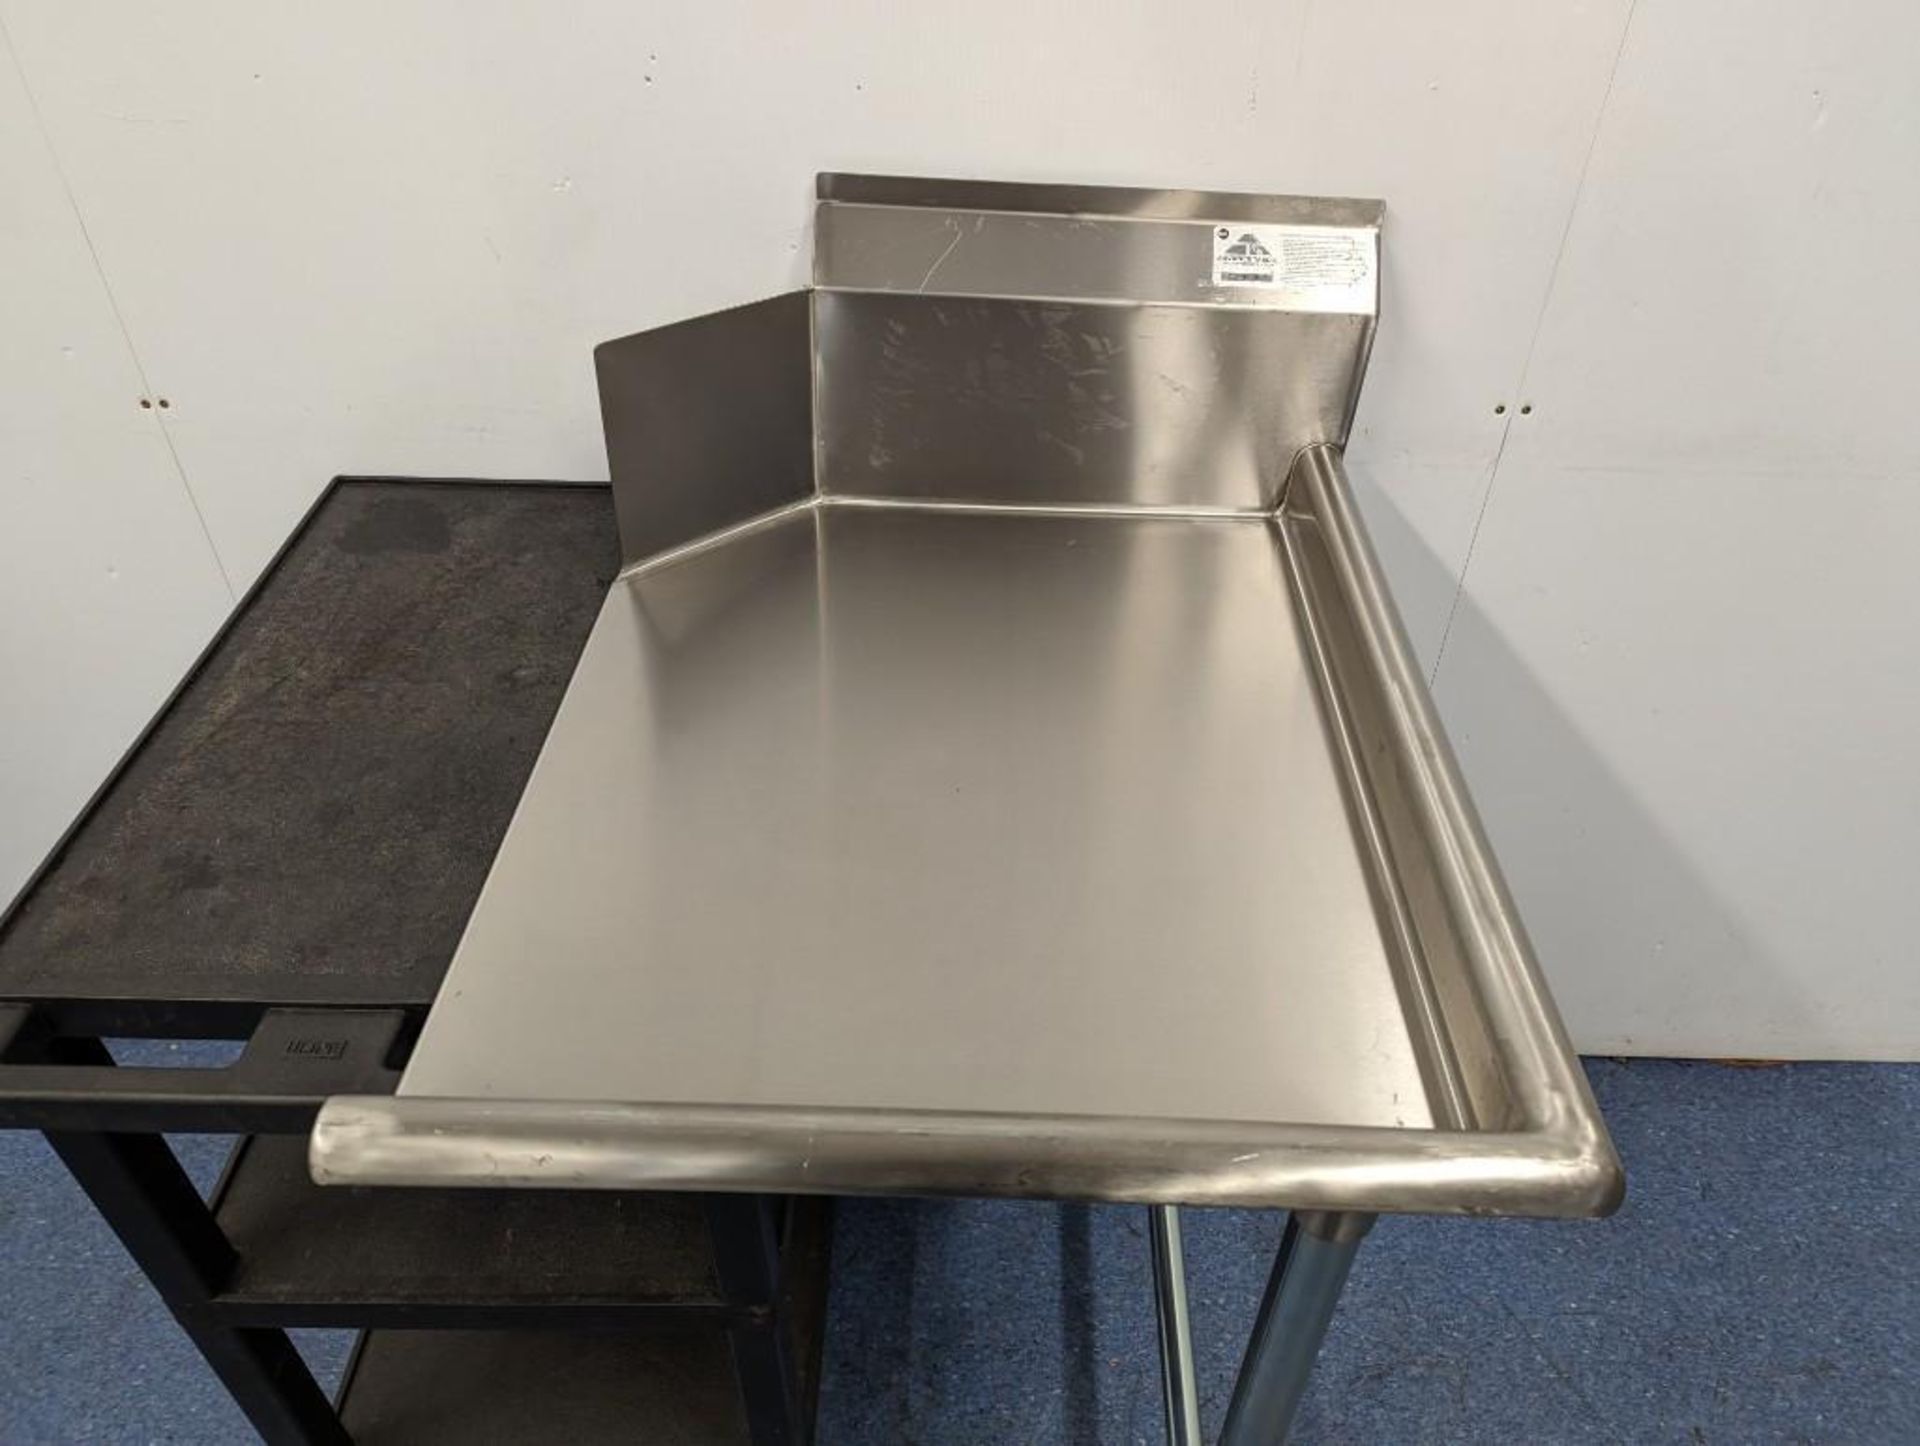 ADVANCE TABCO STAINLESS STEEL SOILED DISHTABLE 35" LEFT SIDE & STRAIGHT CLEAN DISHTABLE 23" RIGHT SI - Image 13 of 18